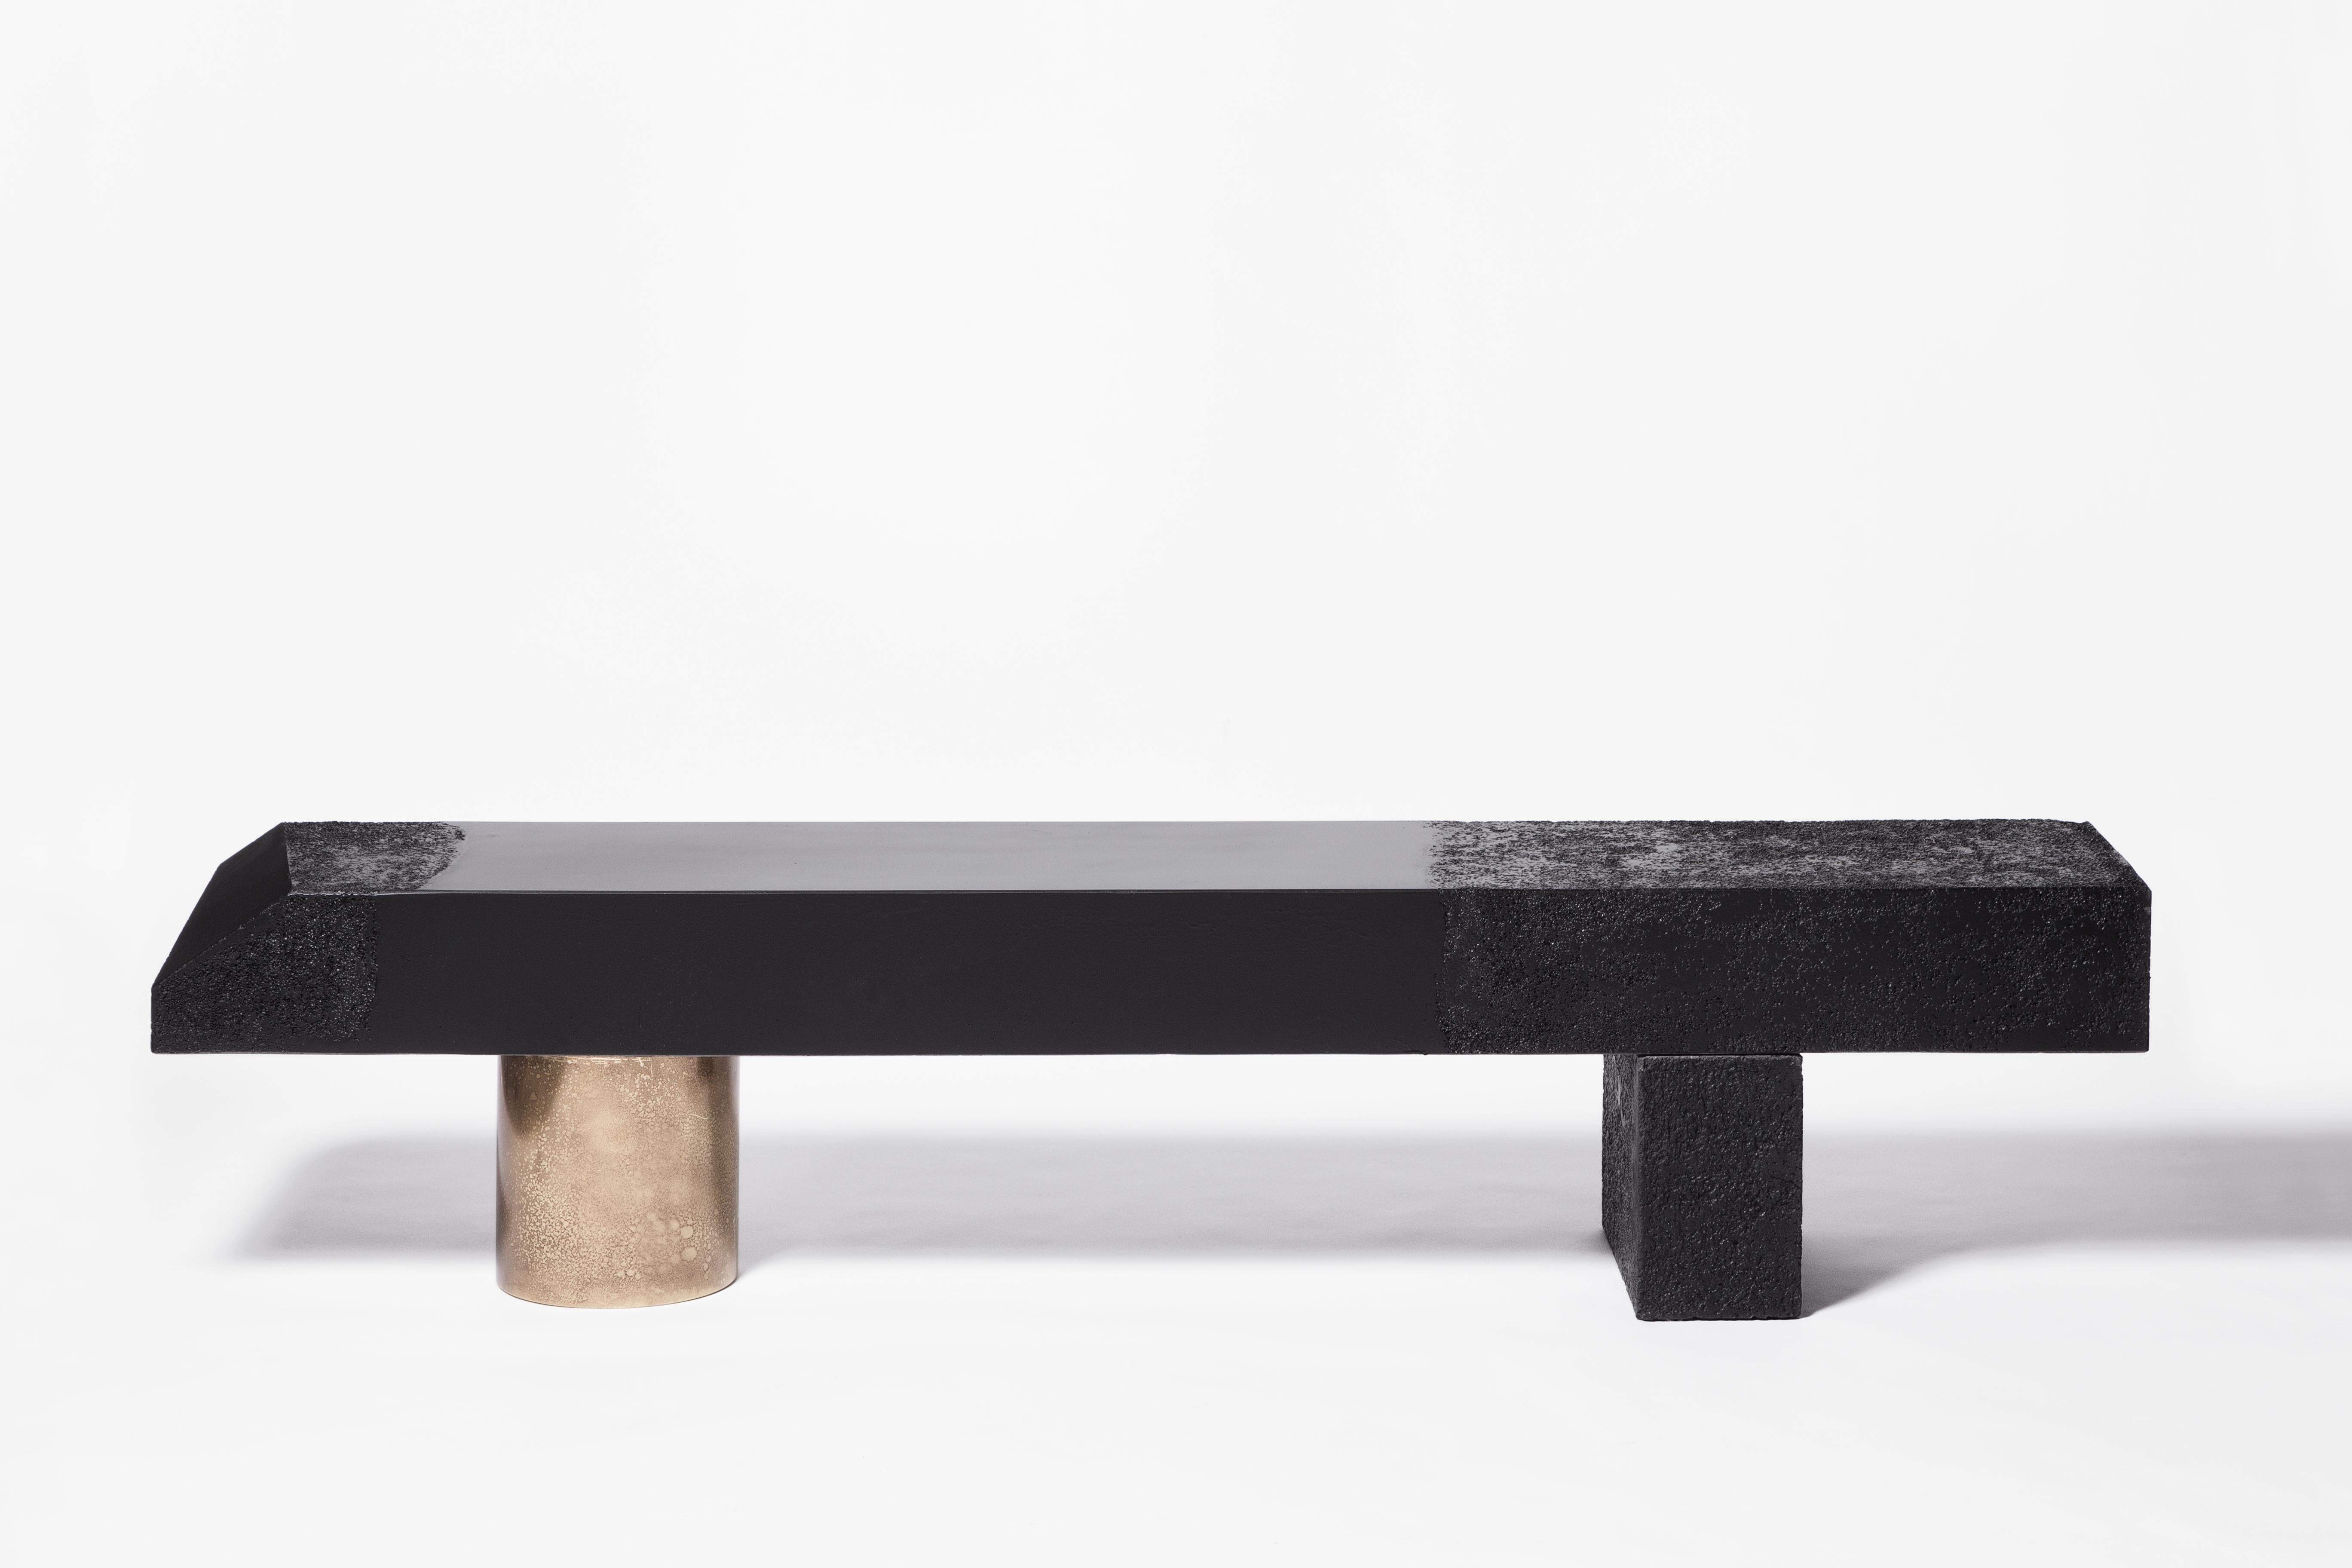 Unique rive bench by Draga & Aurel
Dimensions: W 210 D 40 H 45
Materials: Concrete

Concrete, textured, solid, and rough. In contrast with the transparency and brightness of resin but at the same time similar in workmanship and pliant potential,